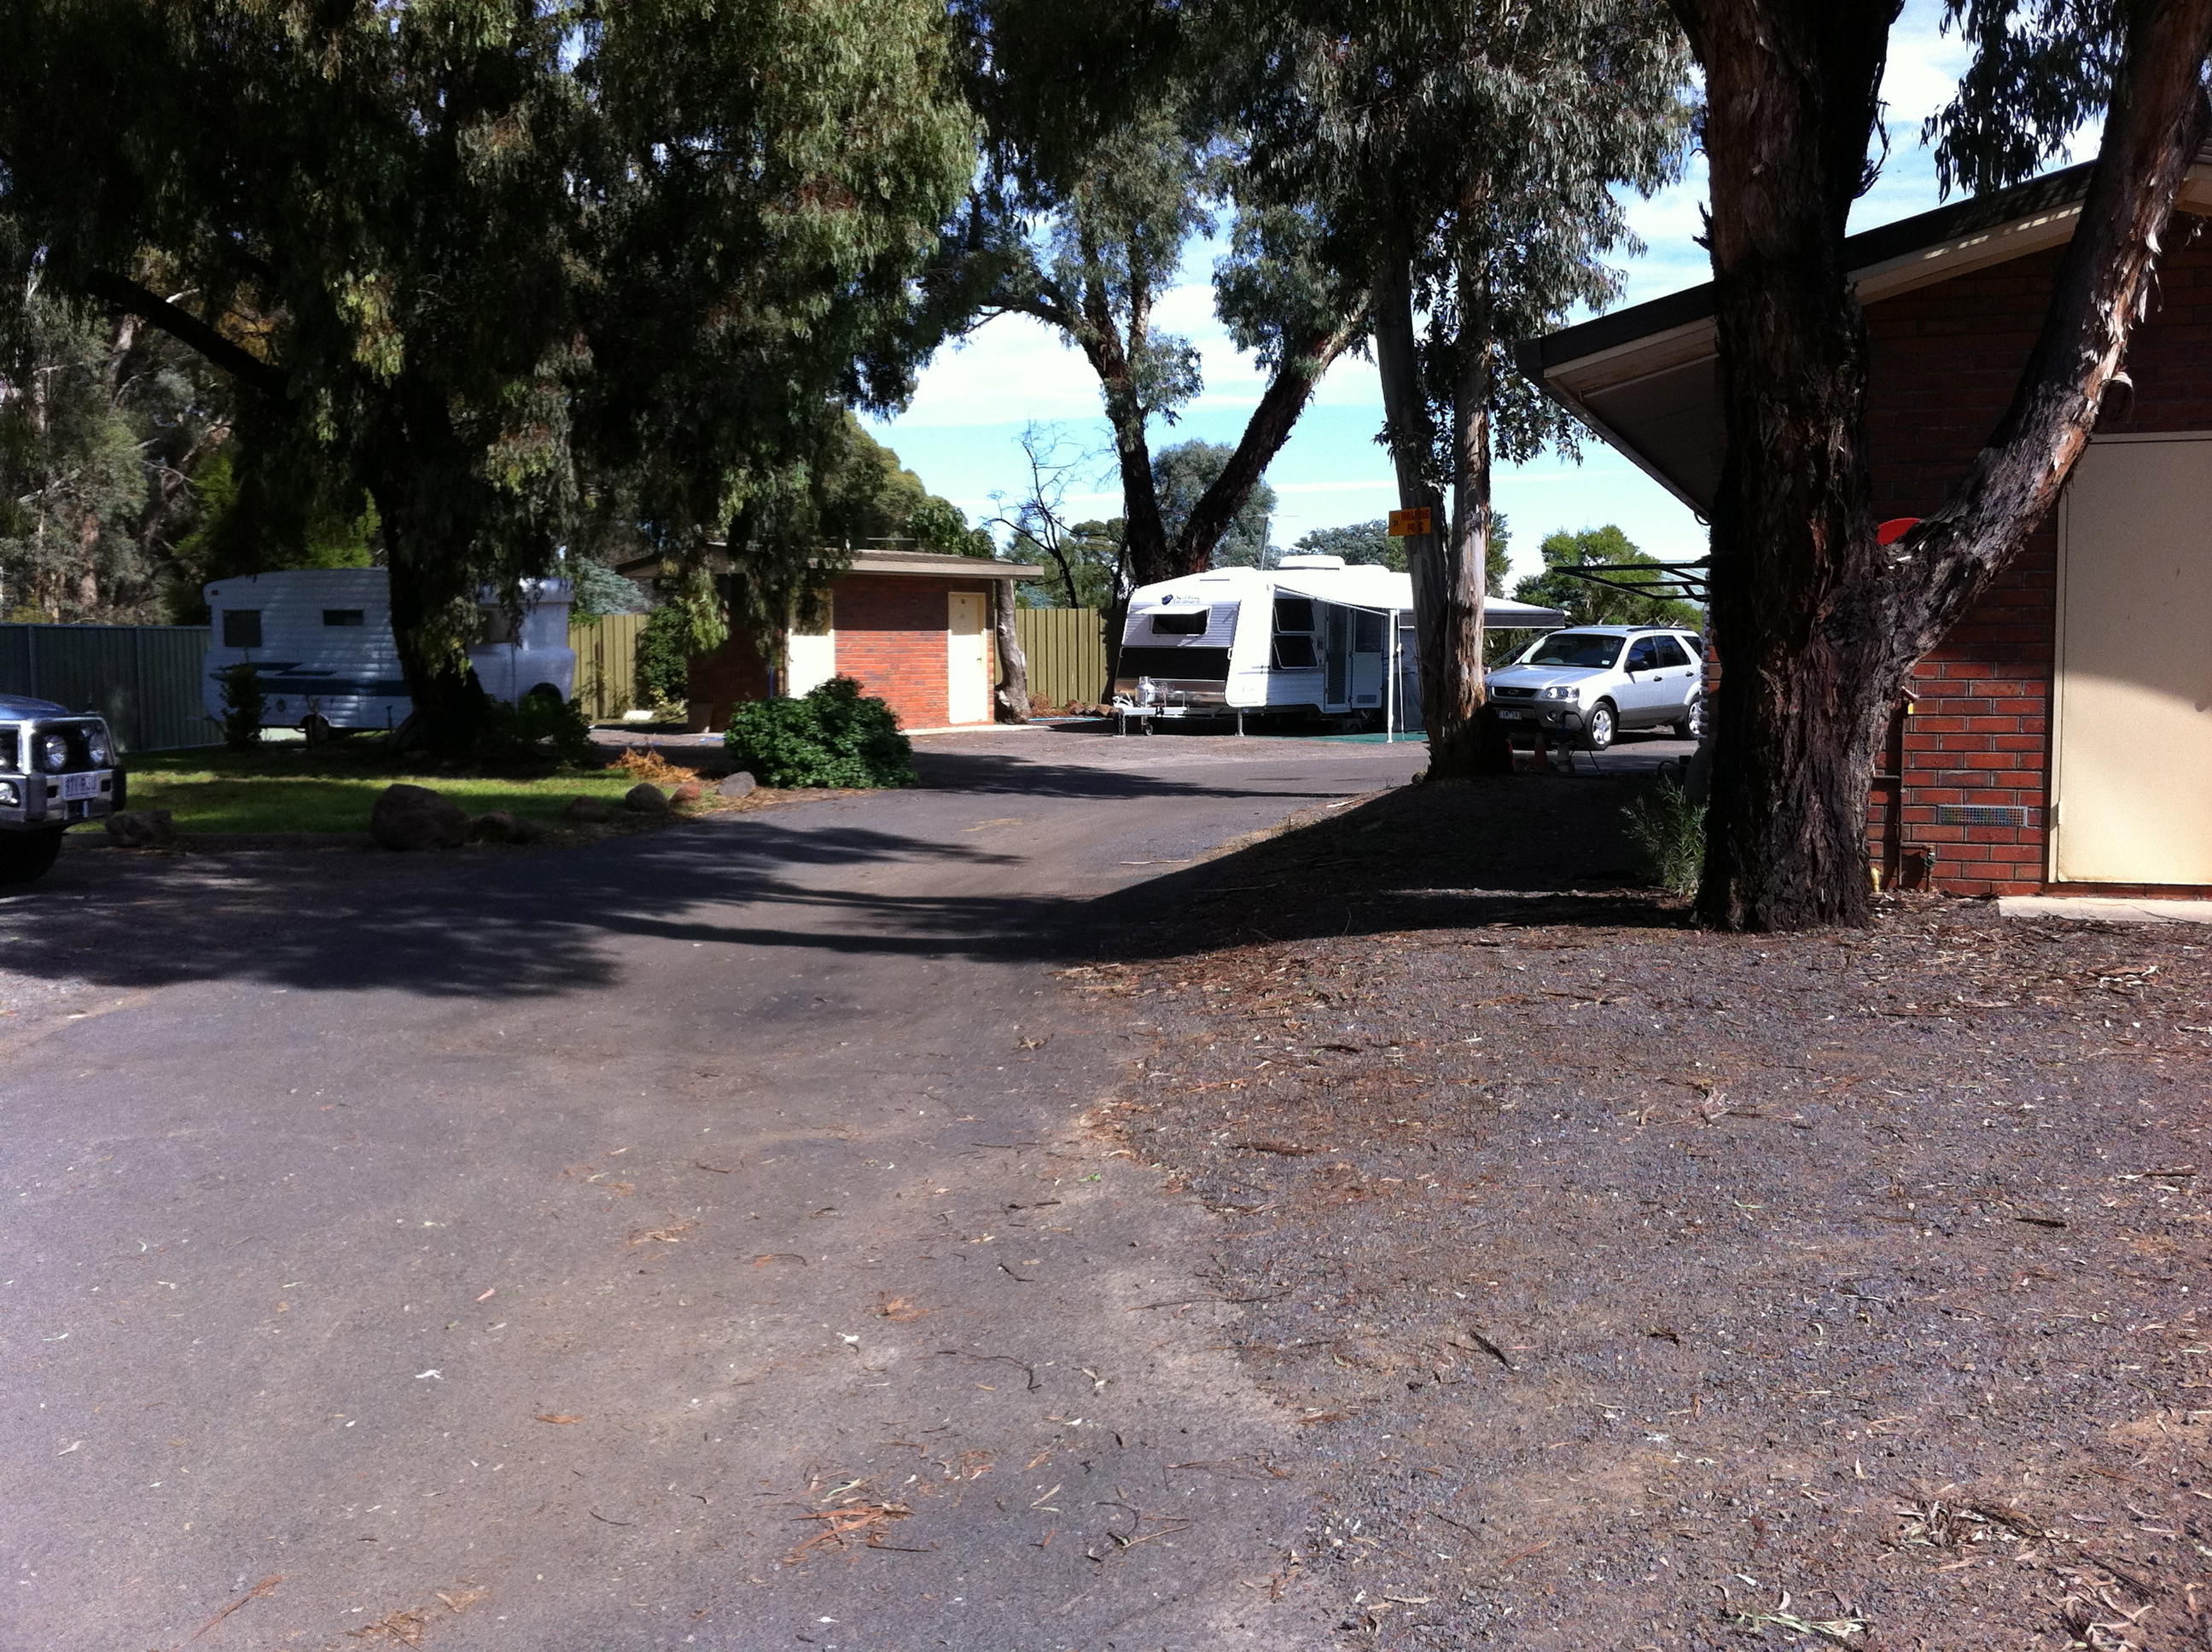 Golden Country Motel and Caravan Park - Maryborough: Sealed roads throughout the park